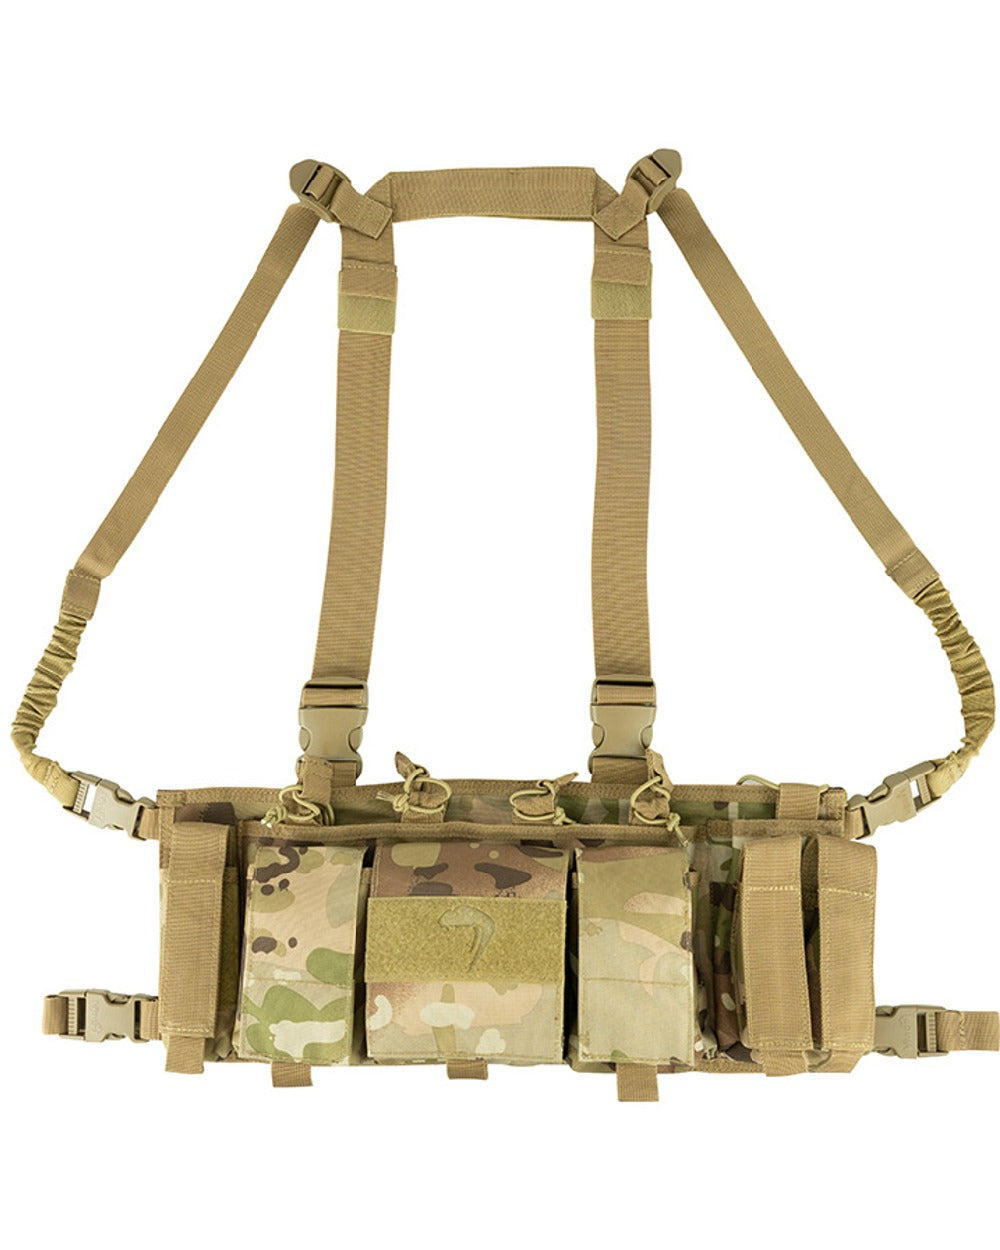 Viper Special Ops Chest Rig in VCAM 